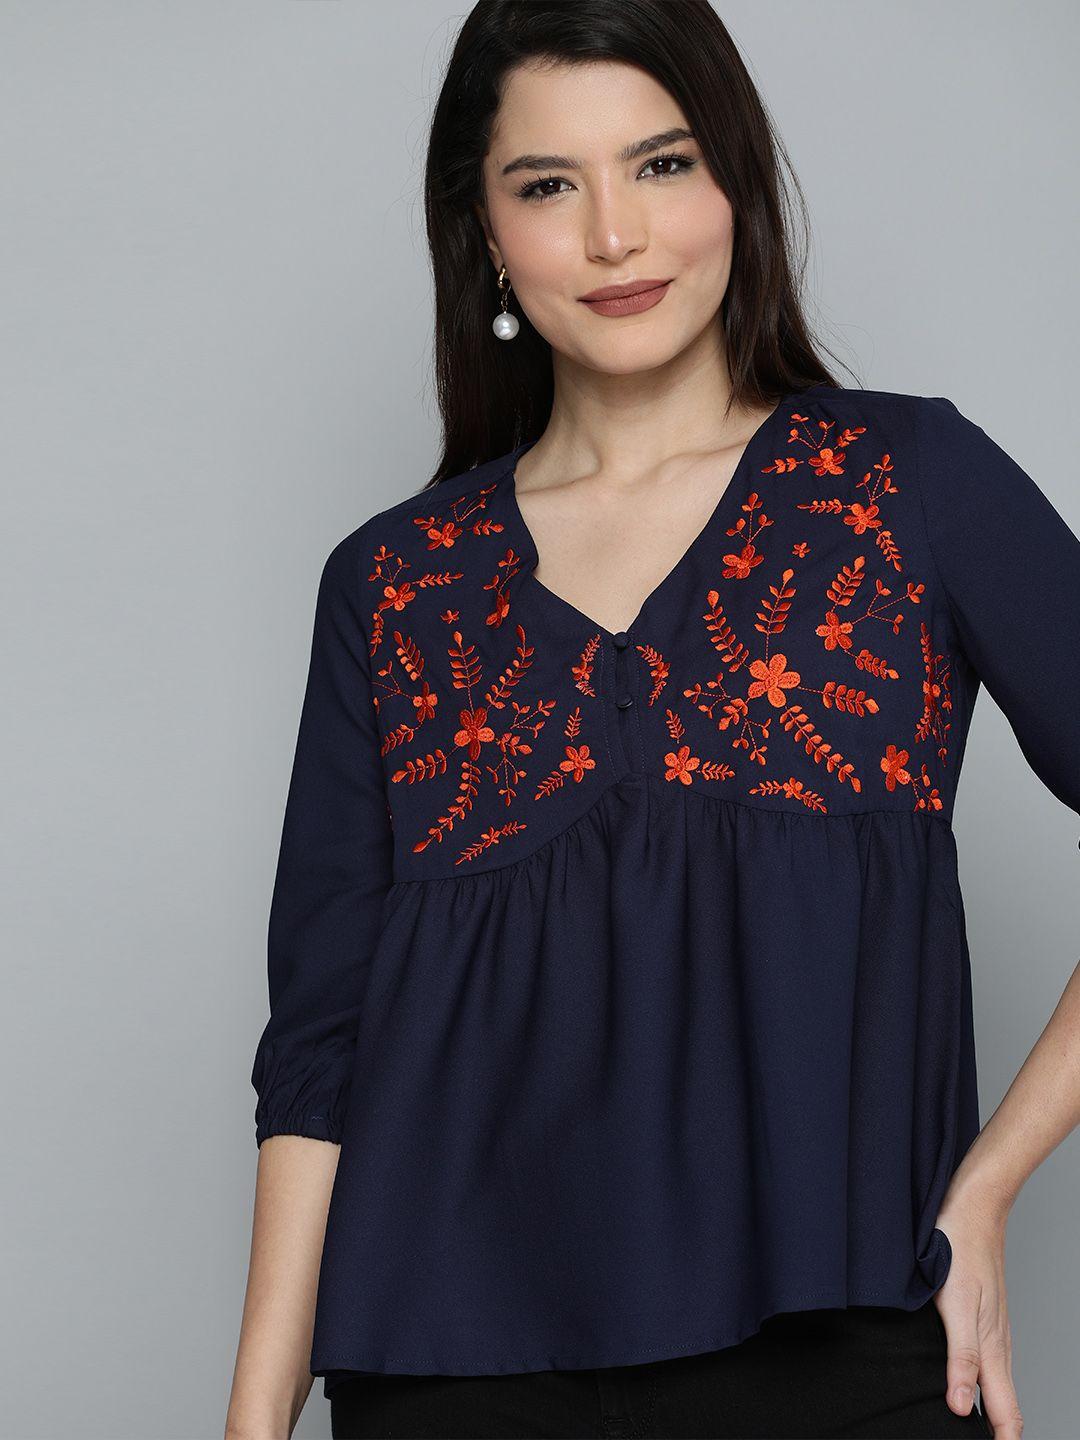 chemistry navy blue & red floral embroidered v - neck empire top